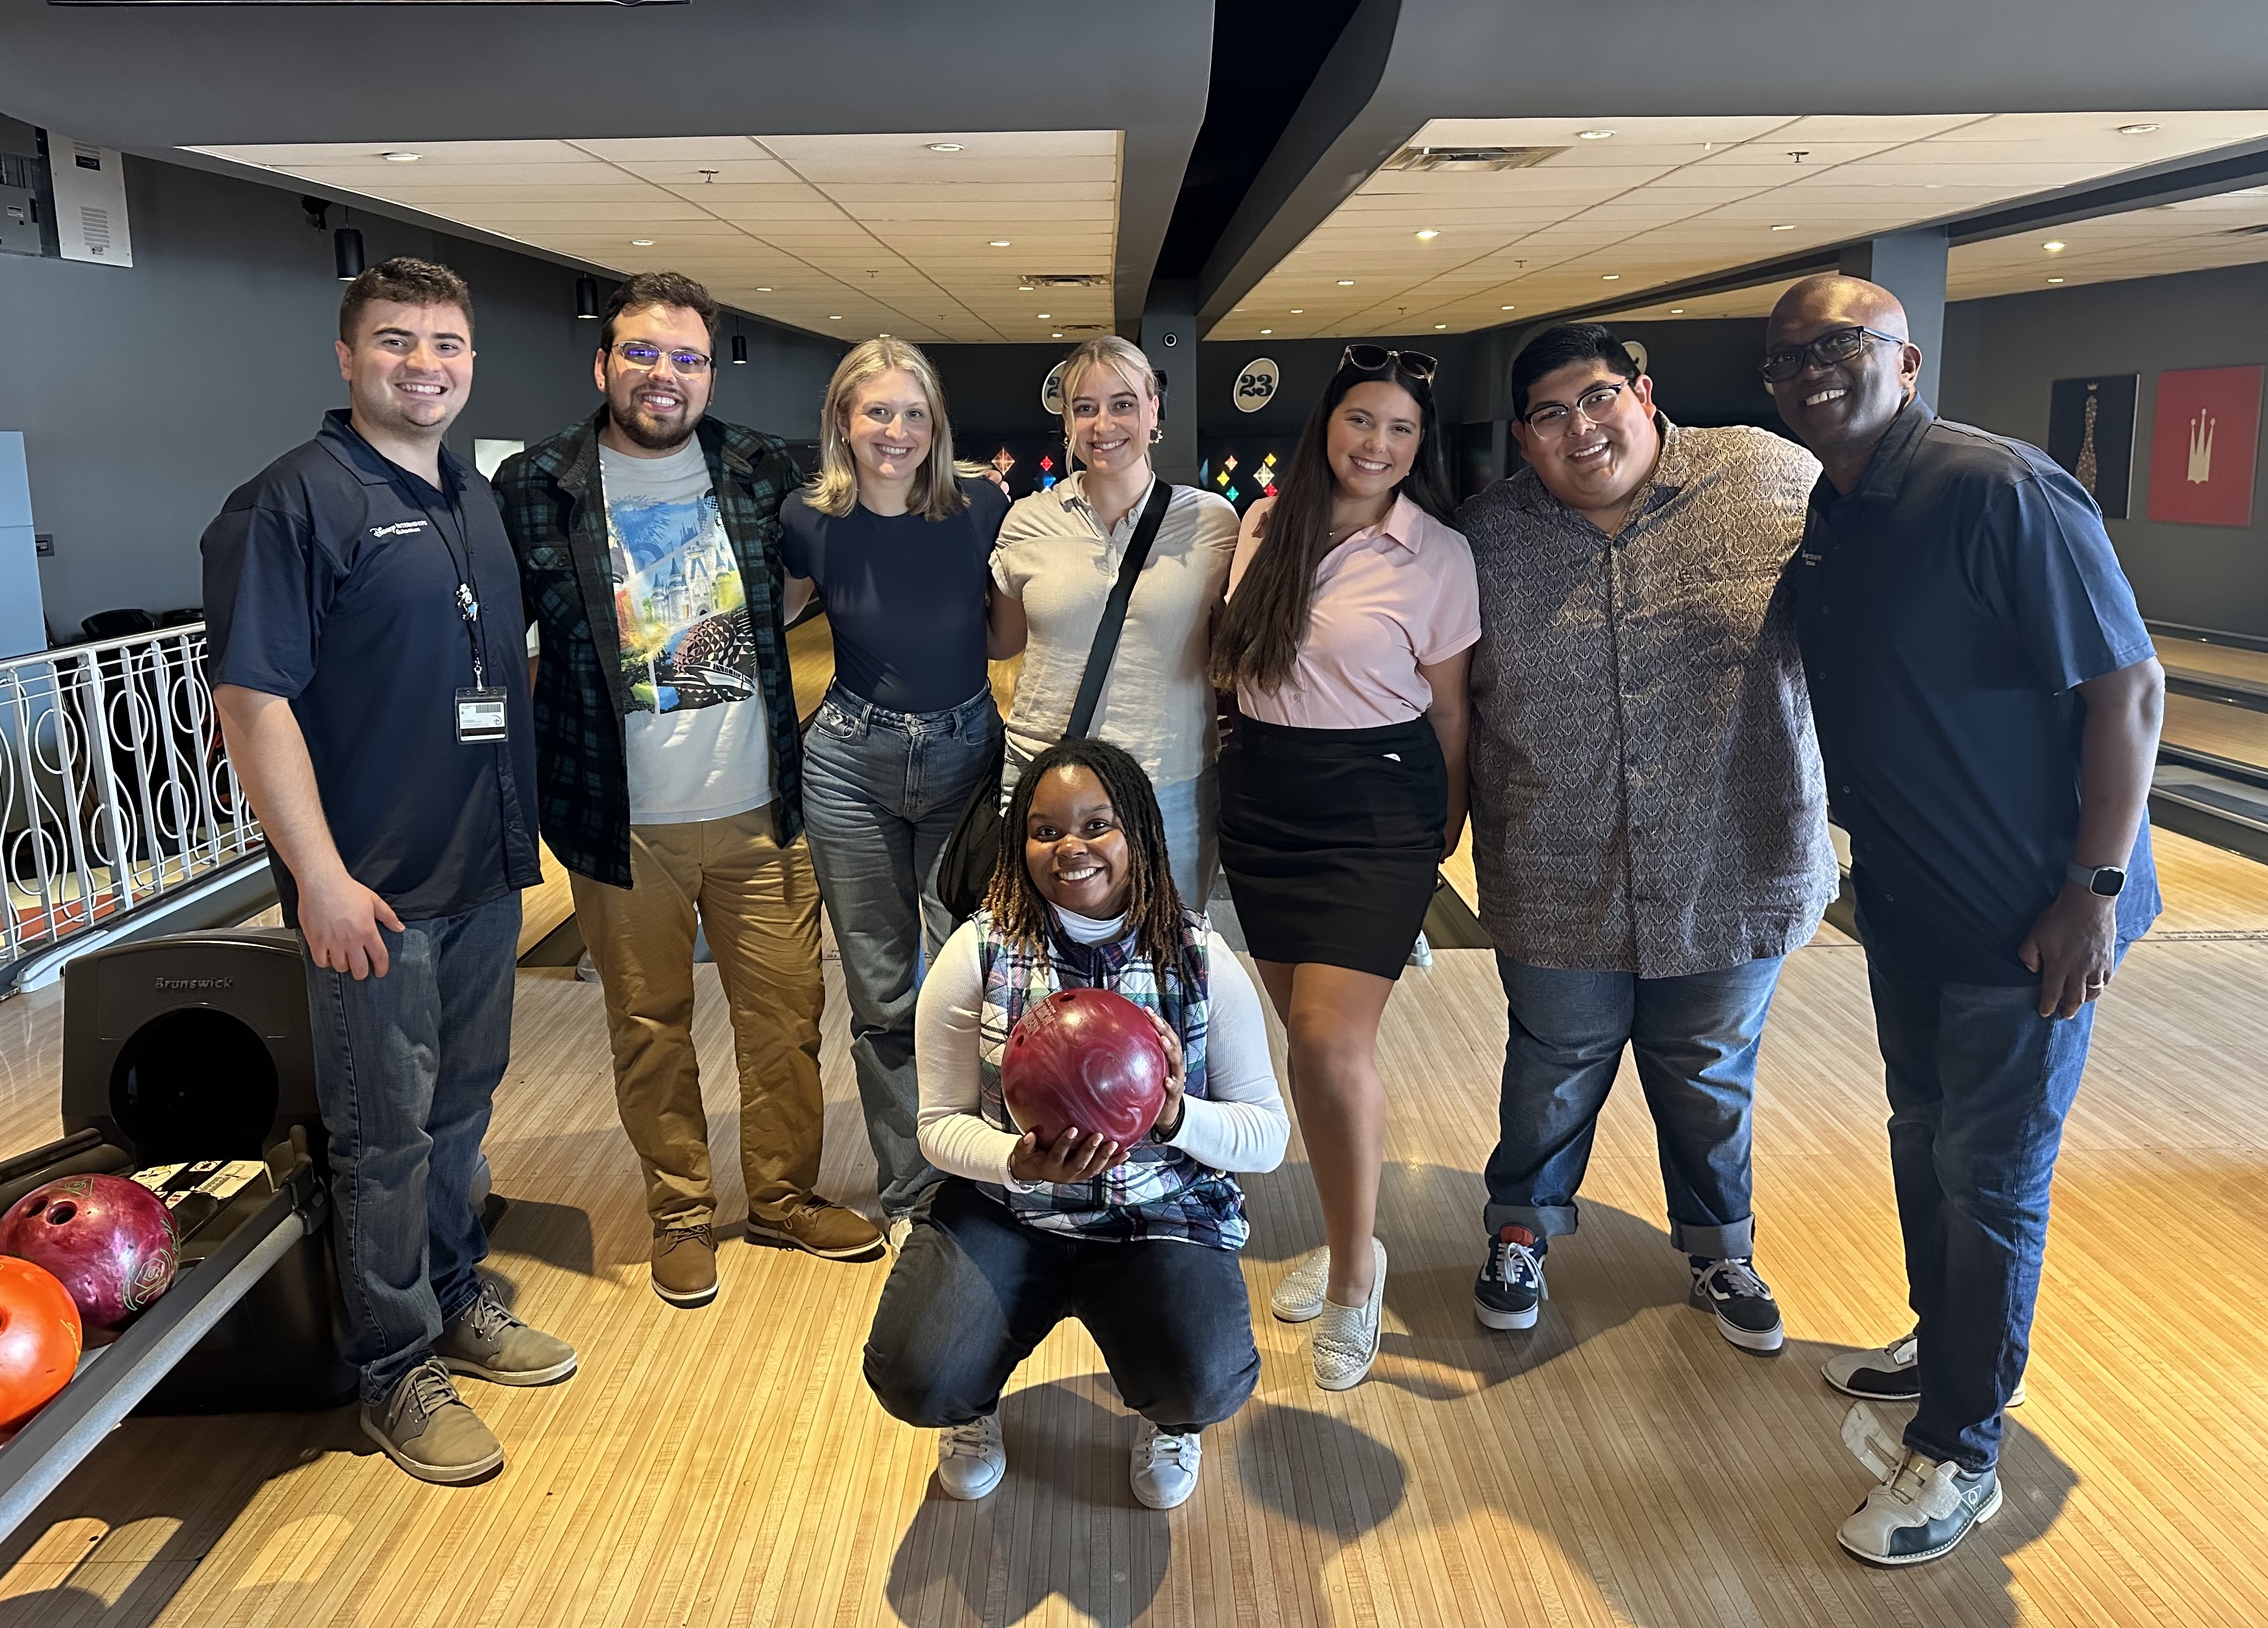 Tschumperlin bowling with other interns